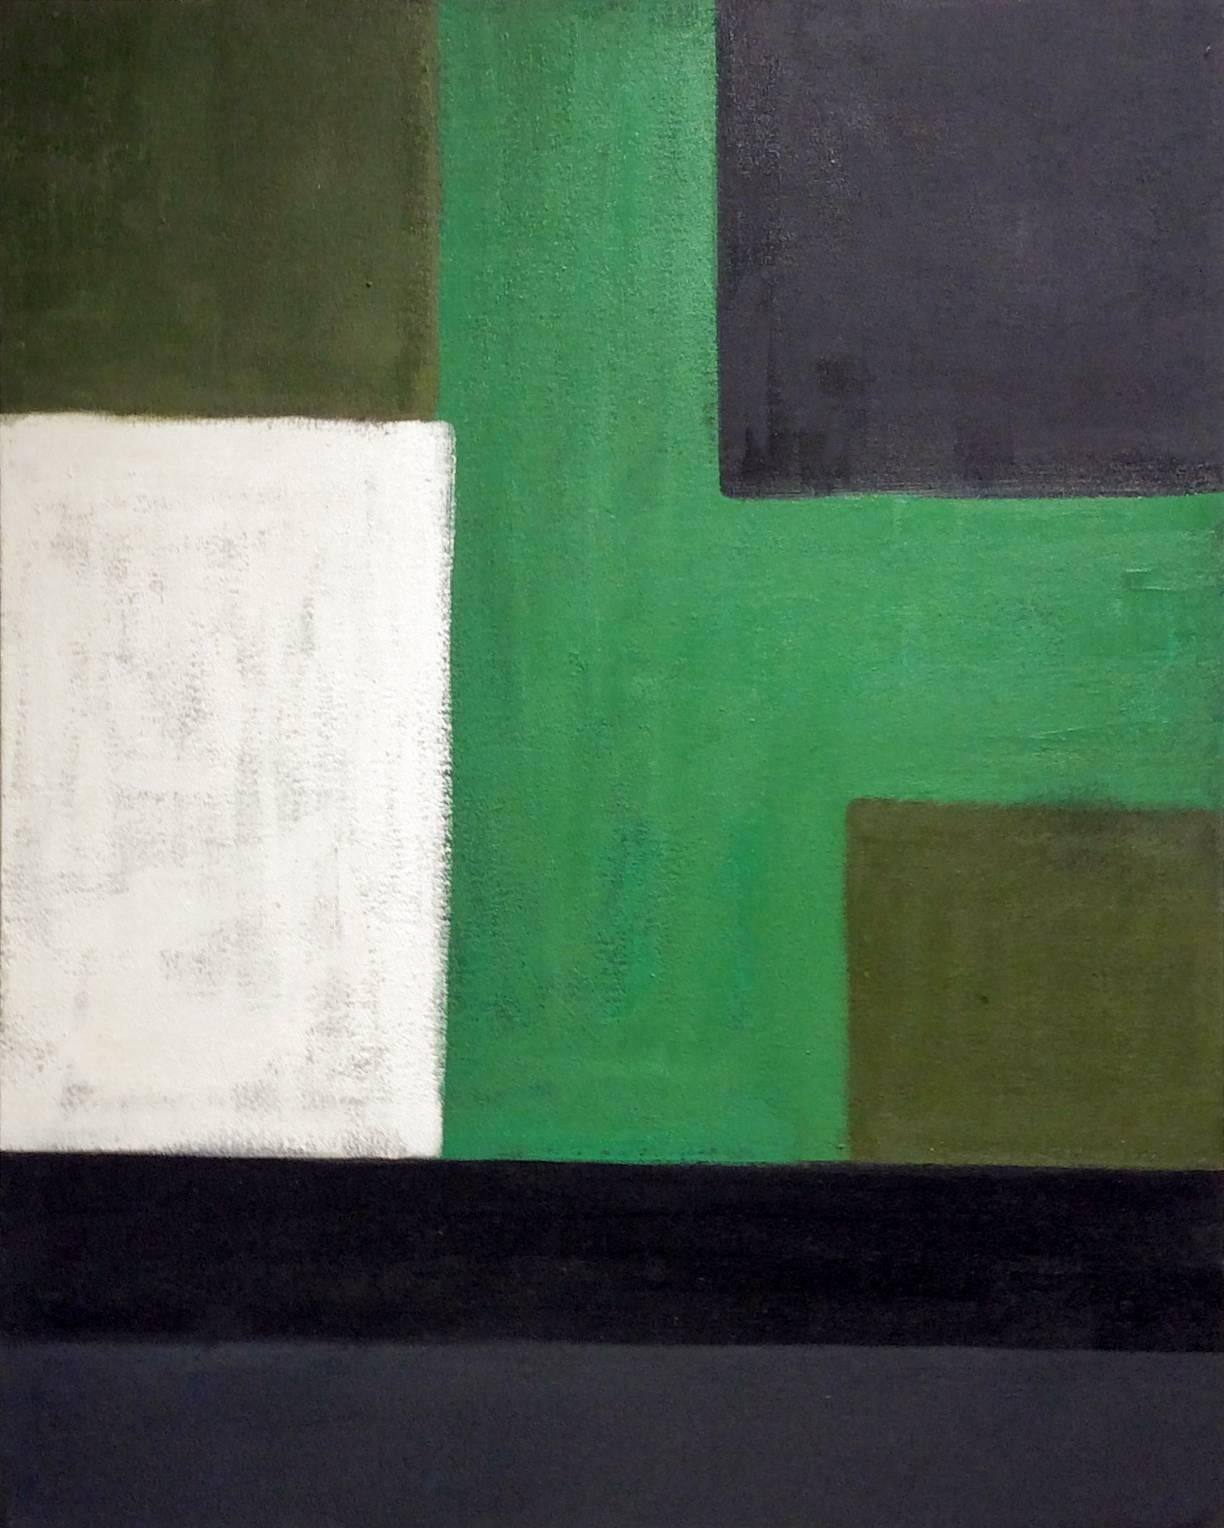 Geometric Abstract Expressionist painting in forest green, emerald green, white and black 
Painting can be oriented vertically or horizontally to your preference
